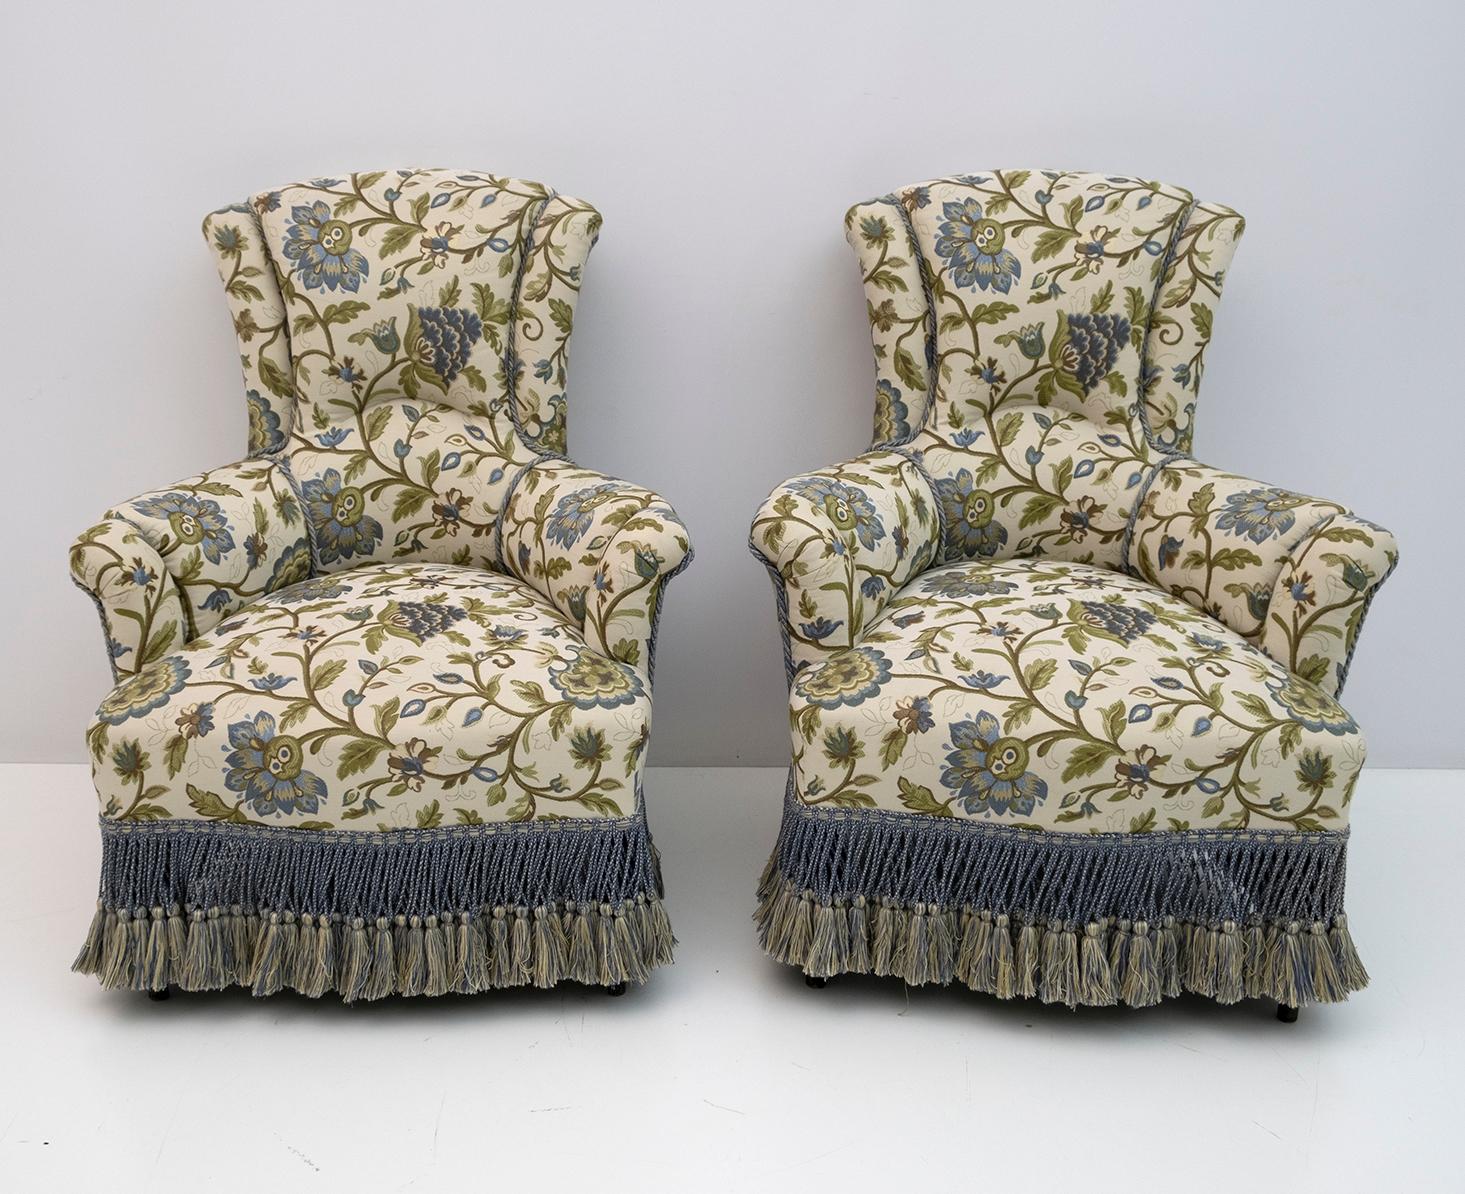 Pair of 19th century armchairs, Napoleon III period. The armchairs have been restored and the upholstery has been replaced with a beautiful Italian Brocade. France, 1870.